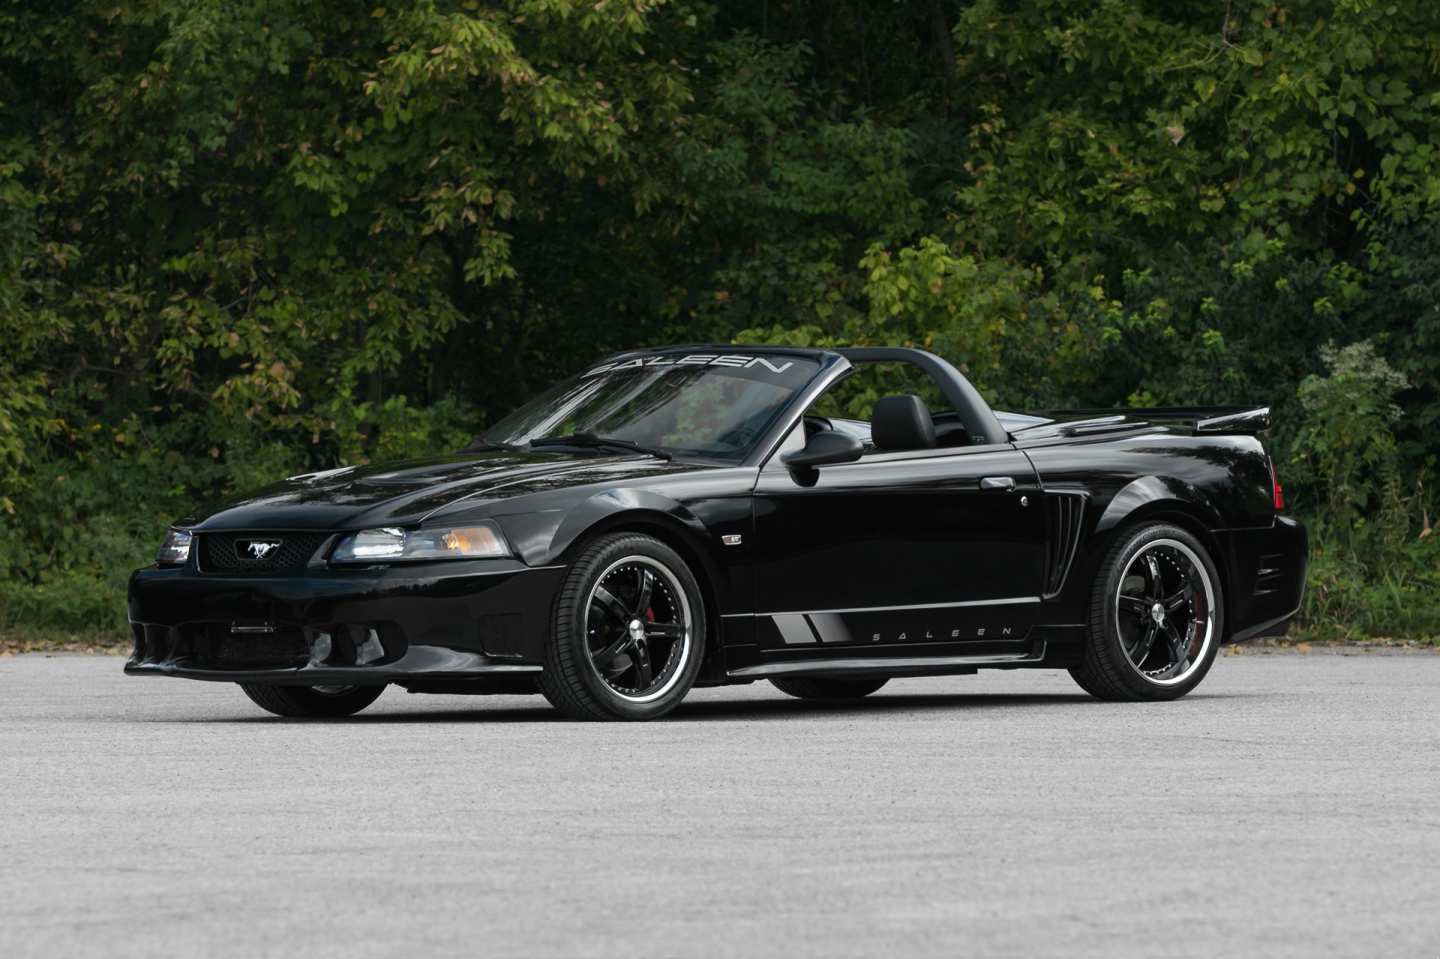 4th Image of a 2004 FORD MUSTANG ROADSTER EDITION